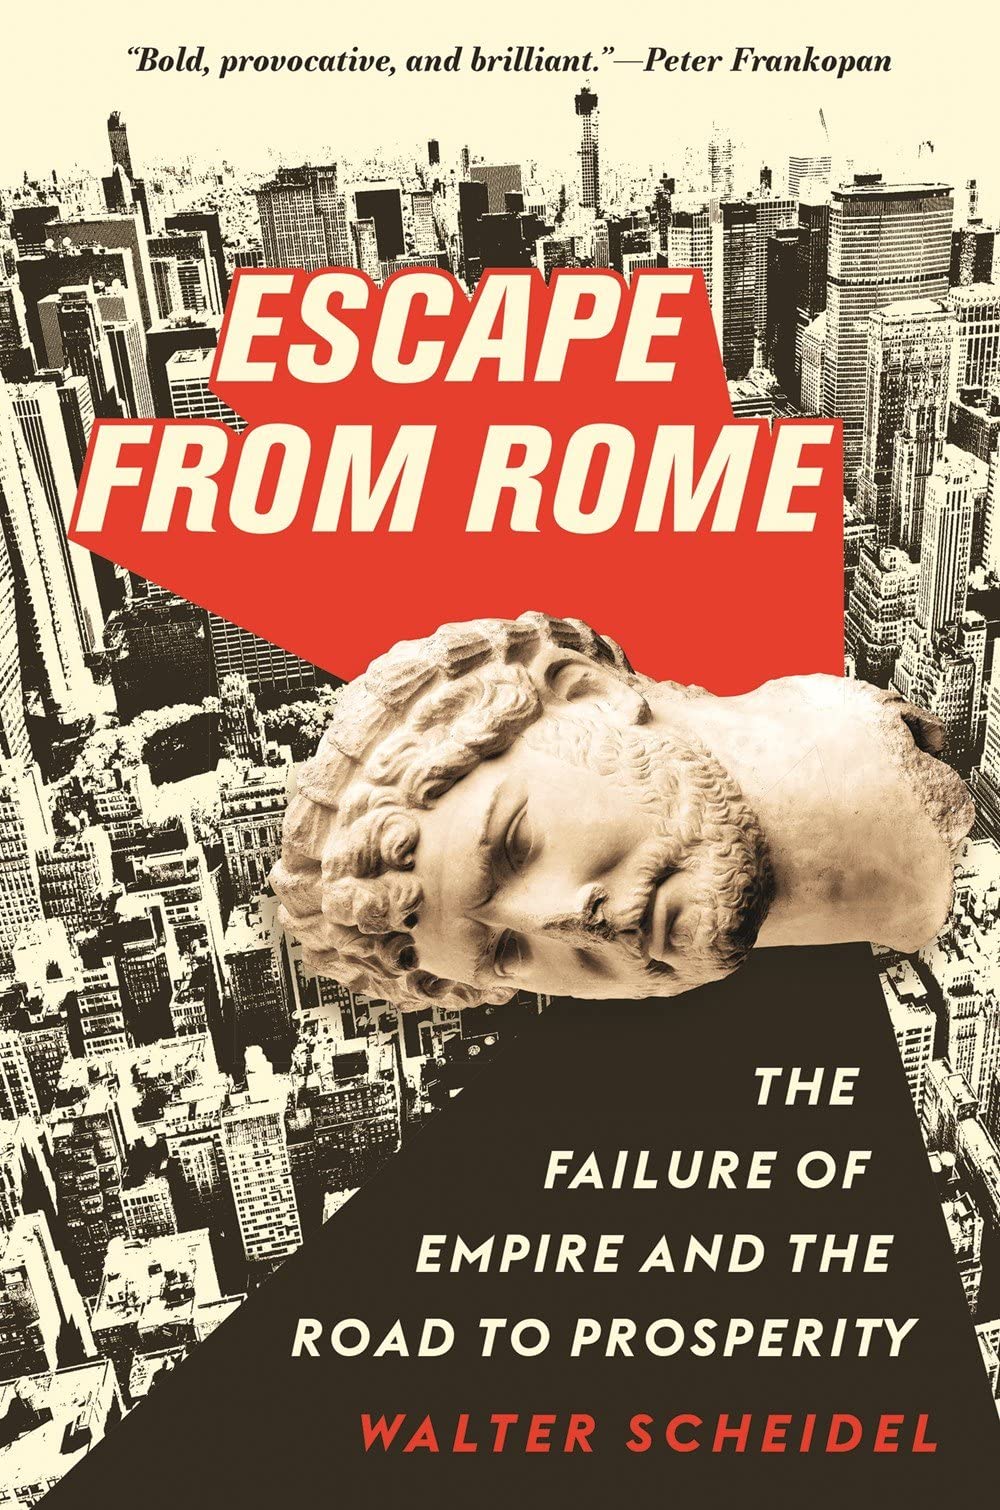 Escape from Rome: The Failure of Empire and the Road to Prosperity (The Princeton Economic History of the Western World, 115)